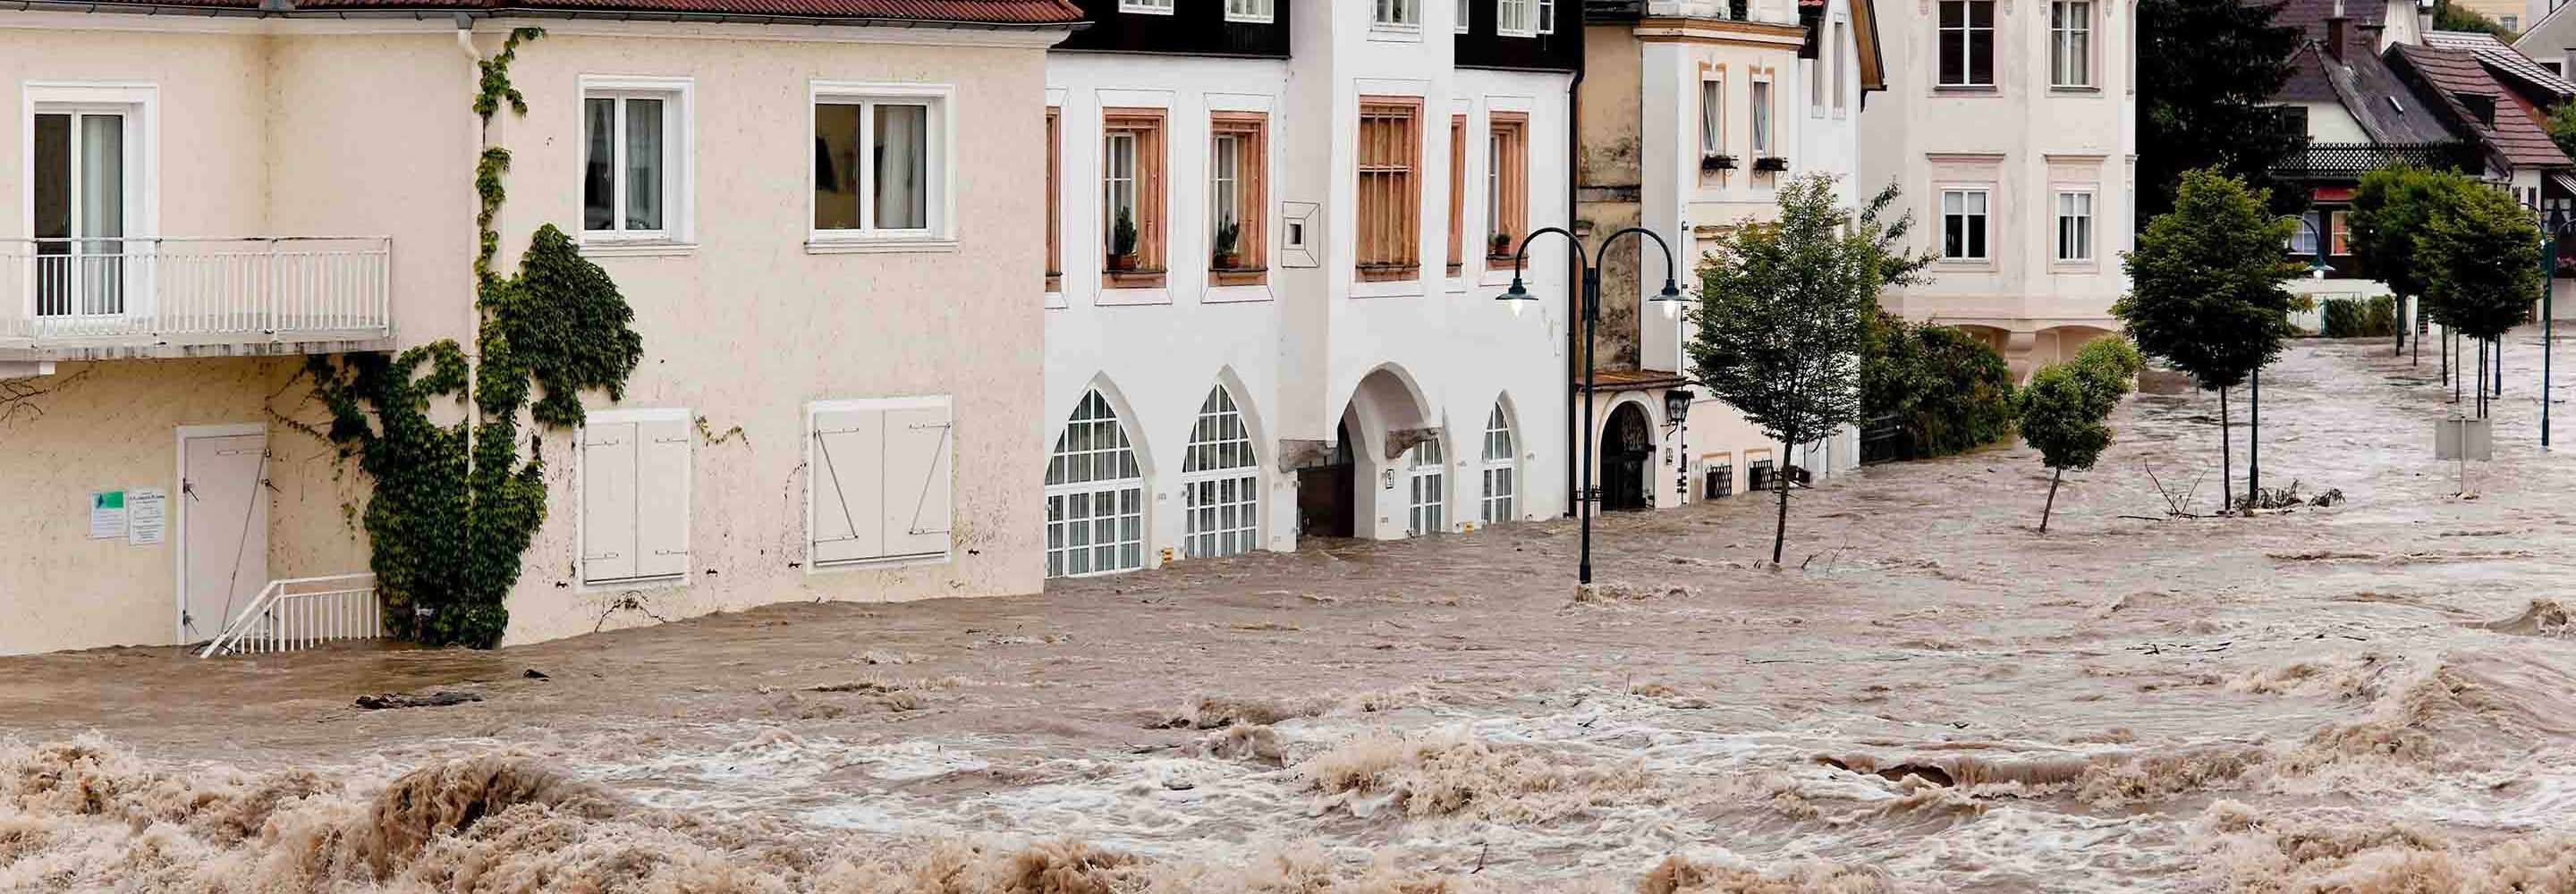 There is flooding in Ludwigshafen. Protect yourself from mold and follow health recommendations. Click here.